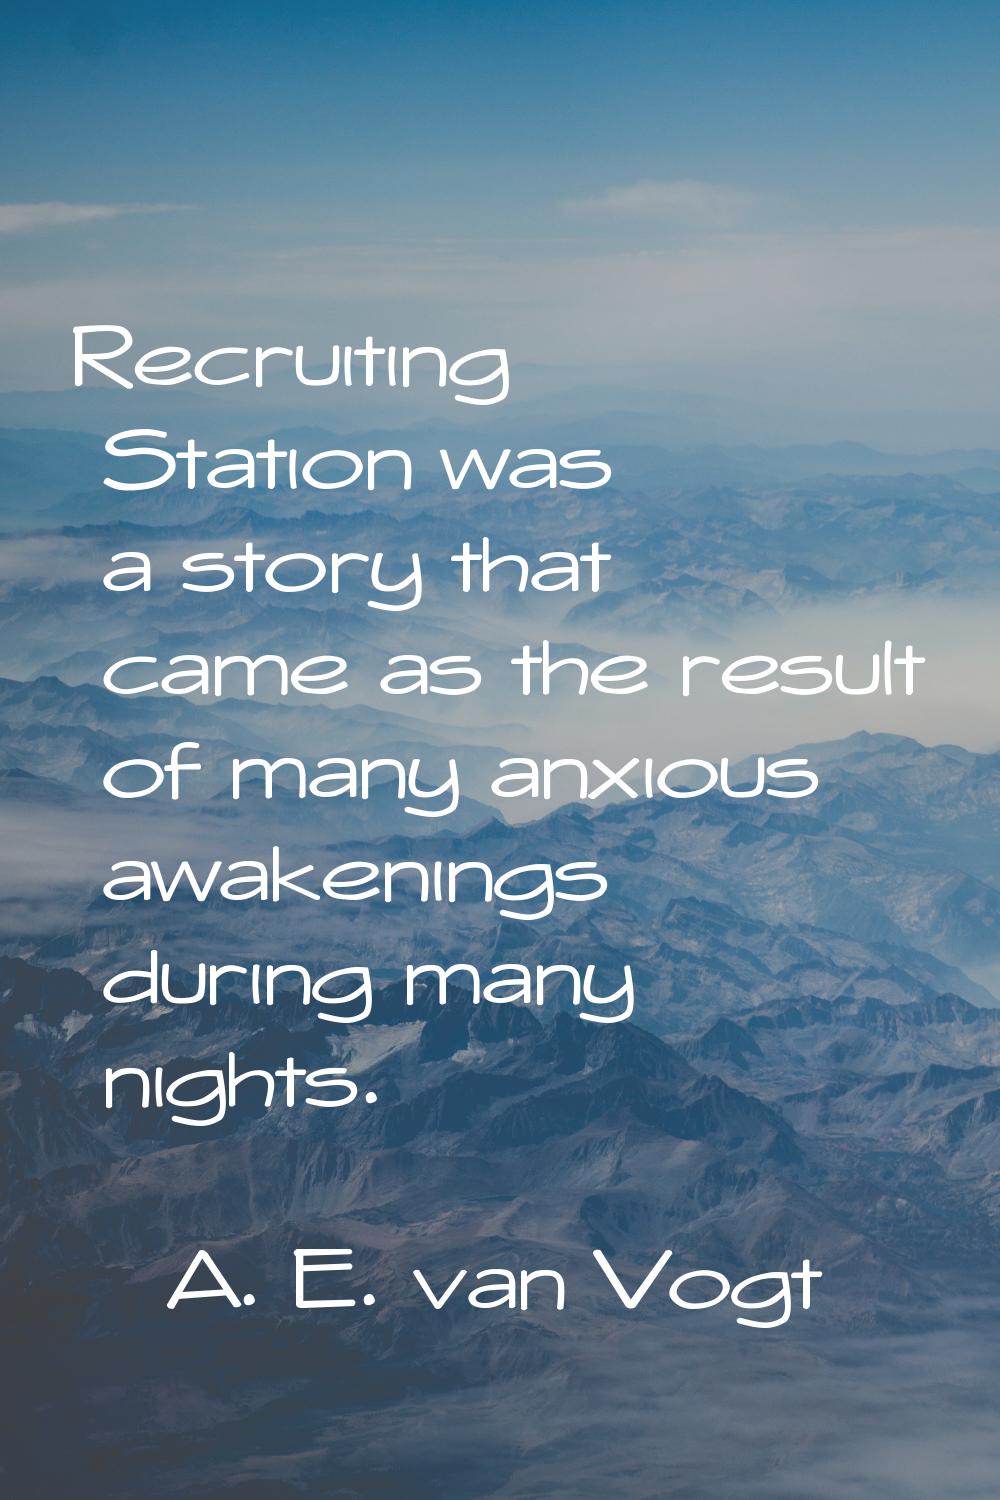 Recruiting Station was a story that came as the result of many anxious awakenings during many night